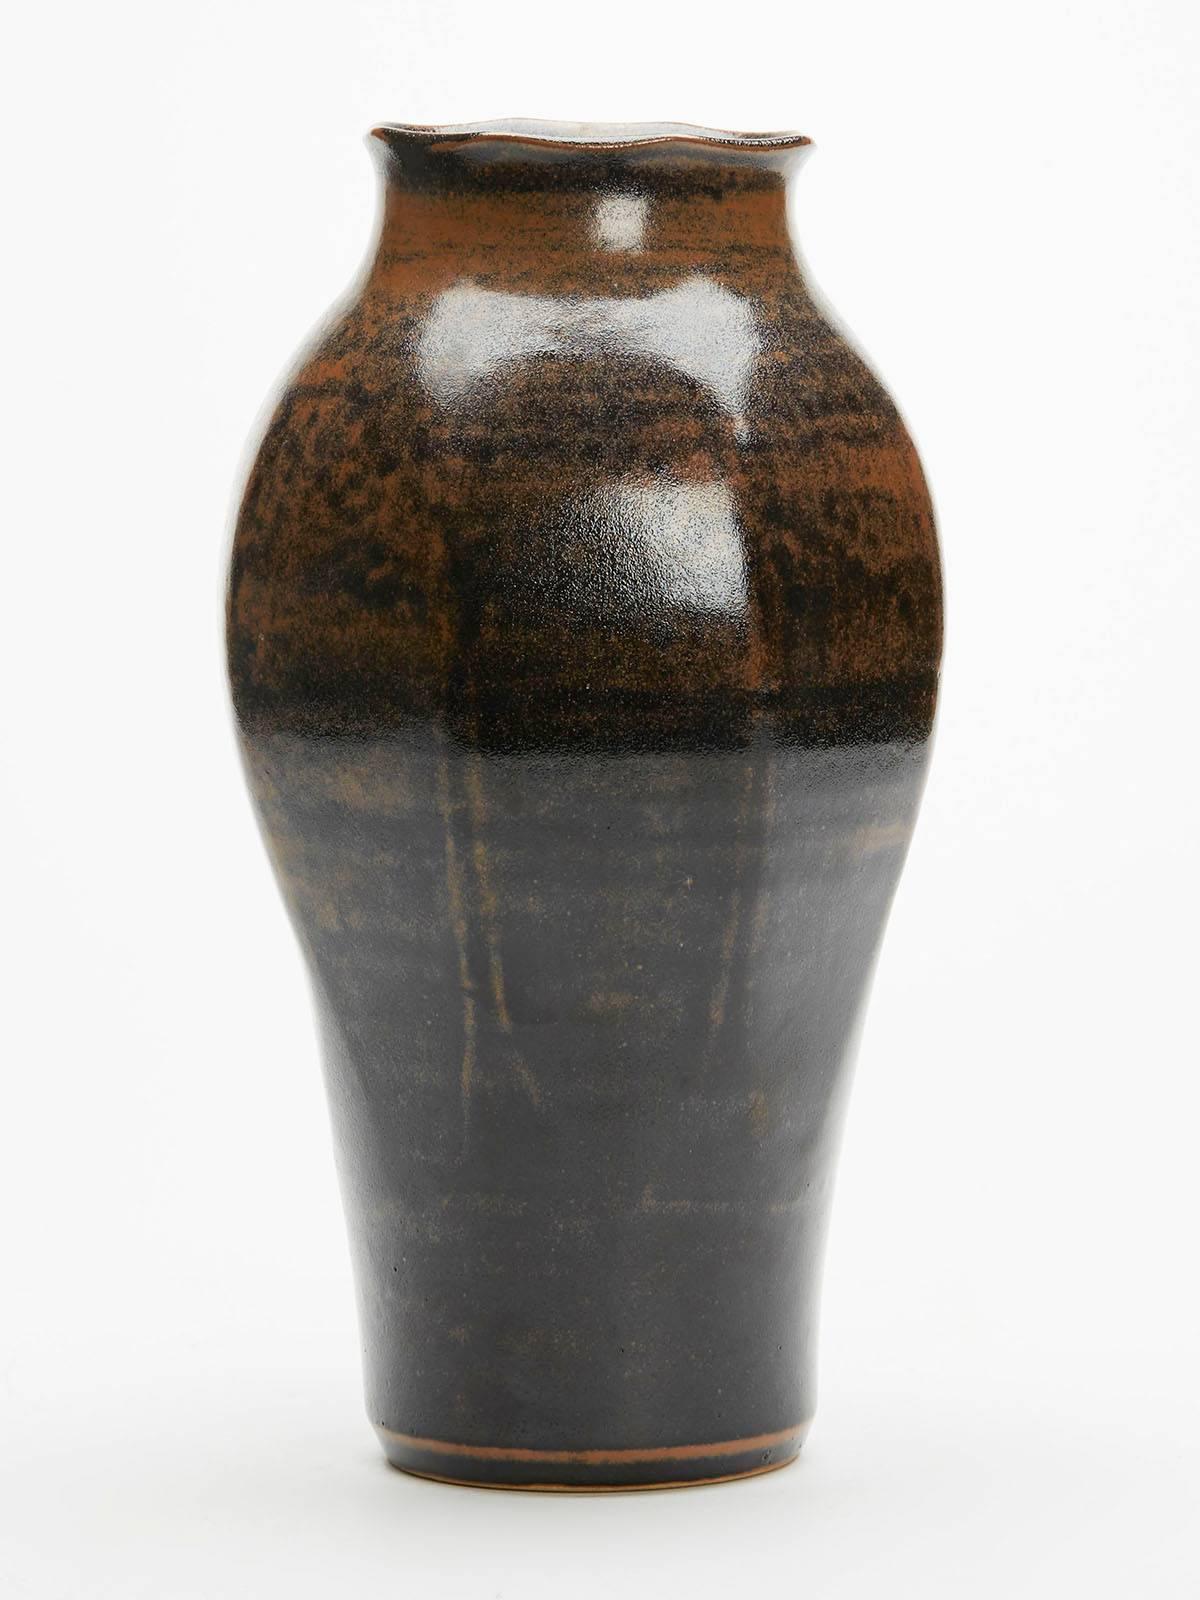 A vintage Ken Halsall Studio Pottery tenmoku glazed octagonal panelled vase. The stoneware vase stands on a narrow rounded foot the body graduating into octagonal shape with a shaped rounded top. Decorated in black on brown tenmoku glazes the vase